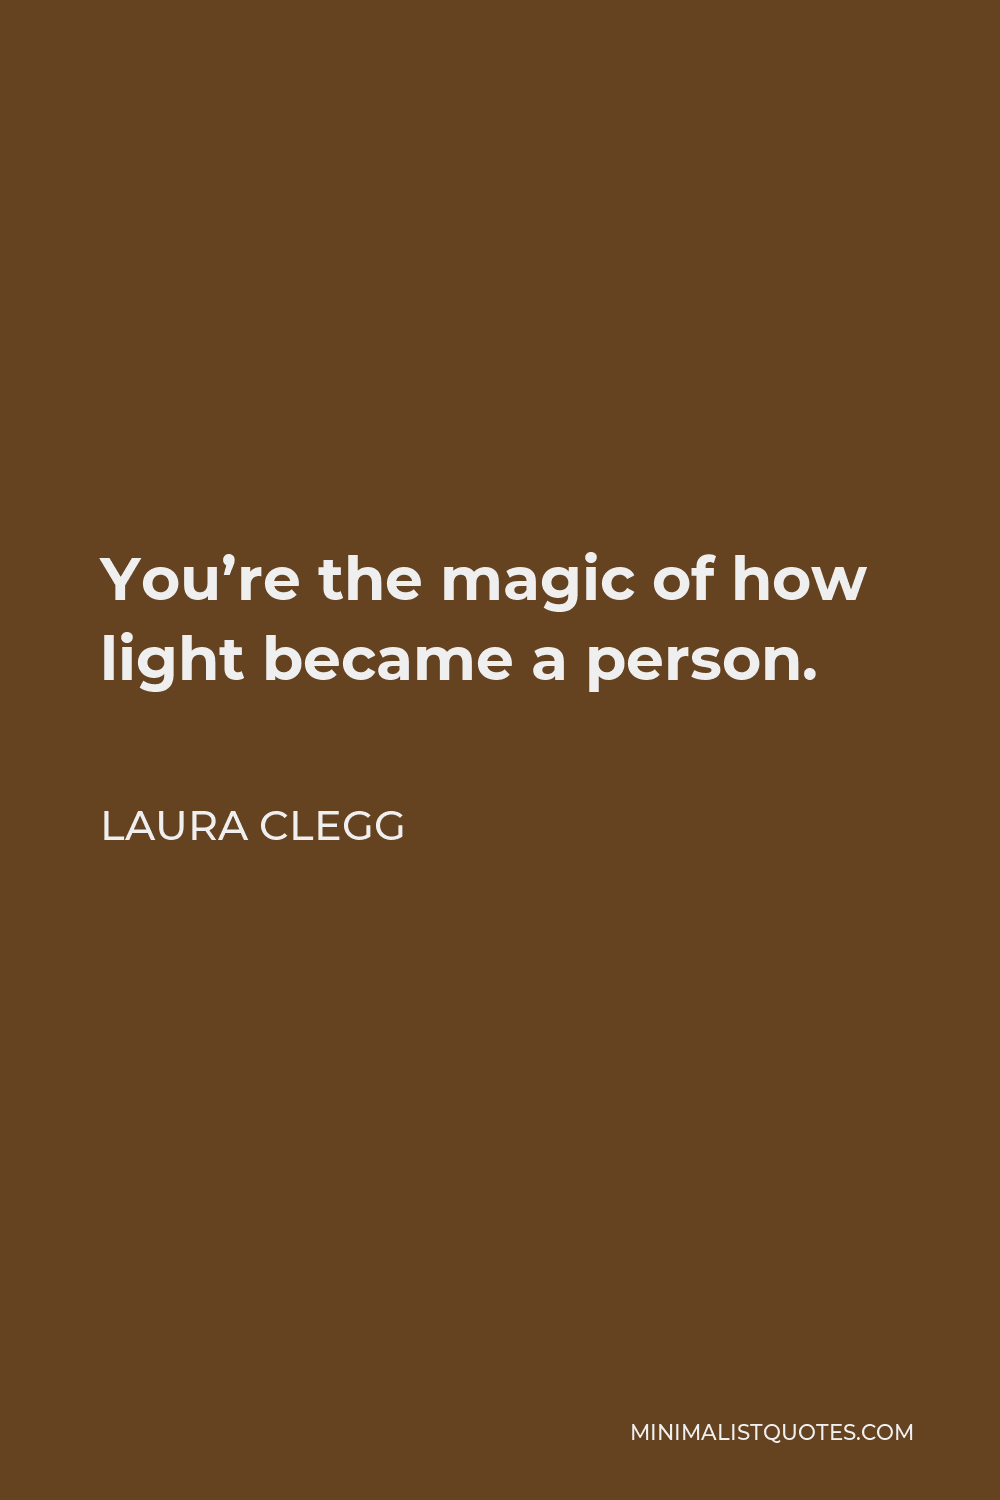 Laura Clegg Quote - You’re the magic of how light became a person.